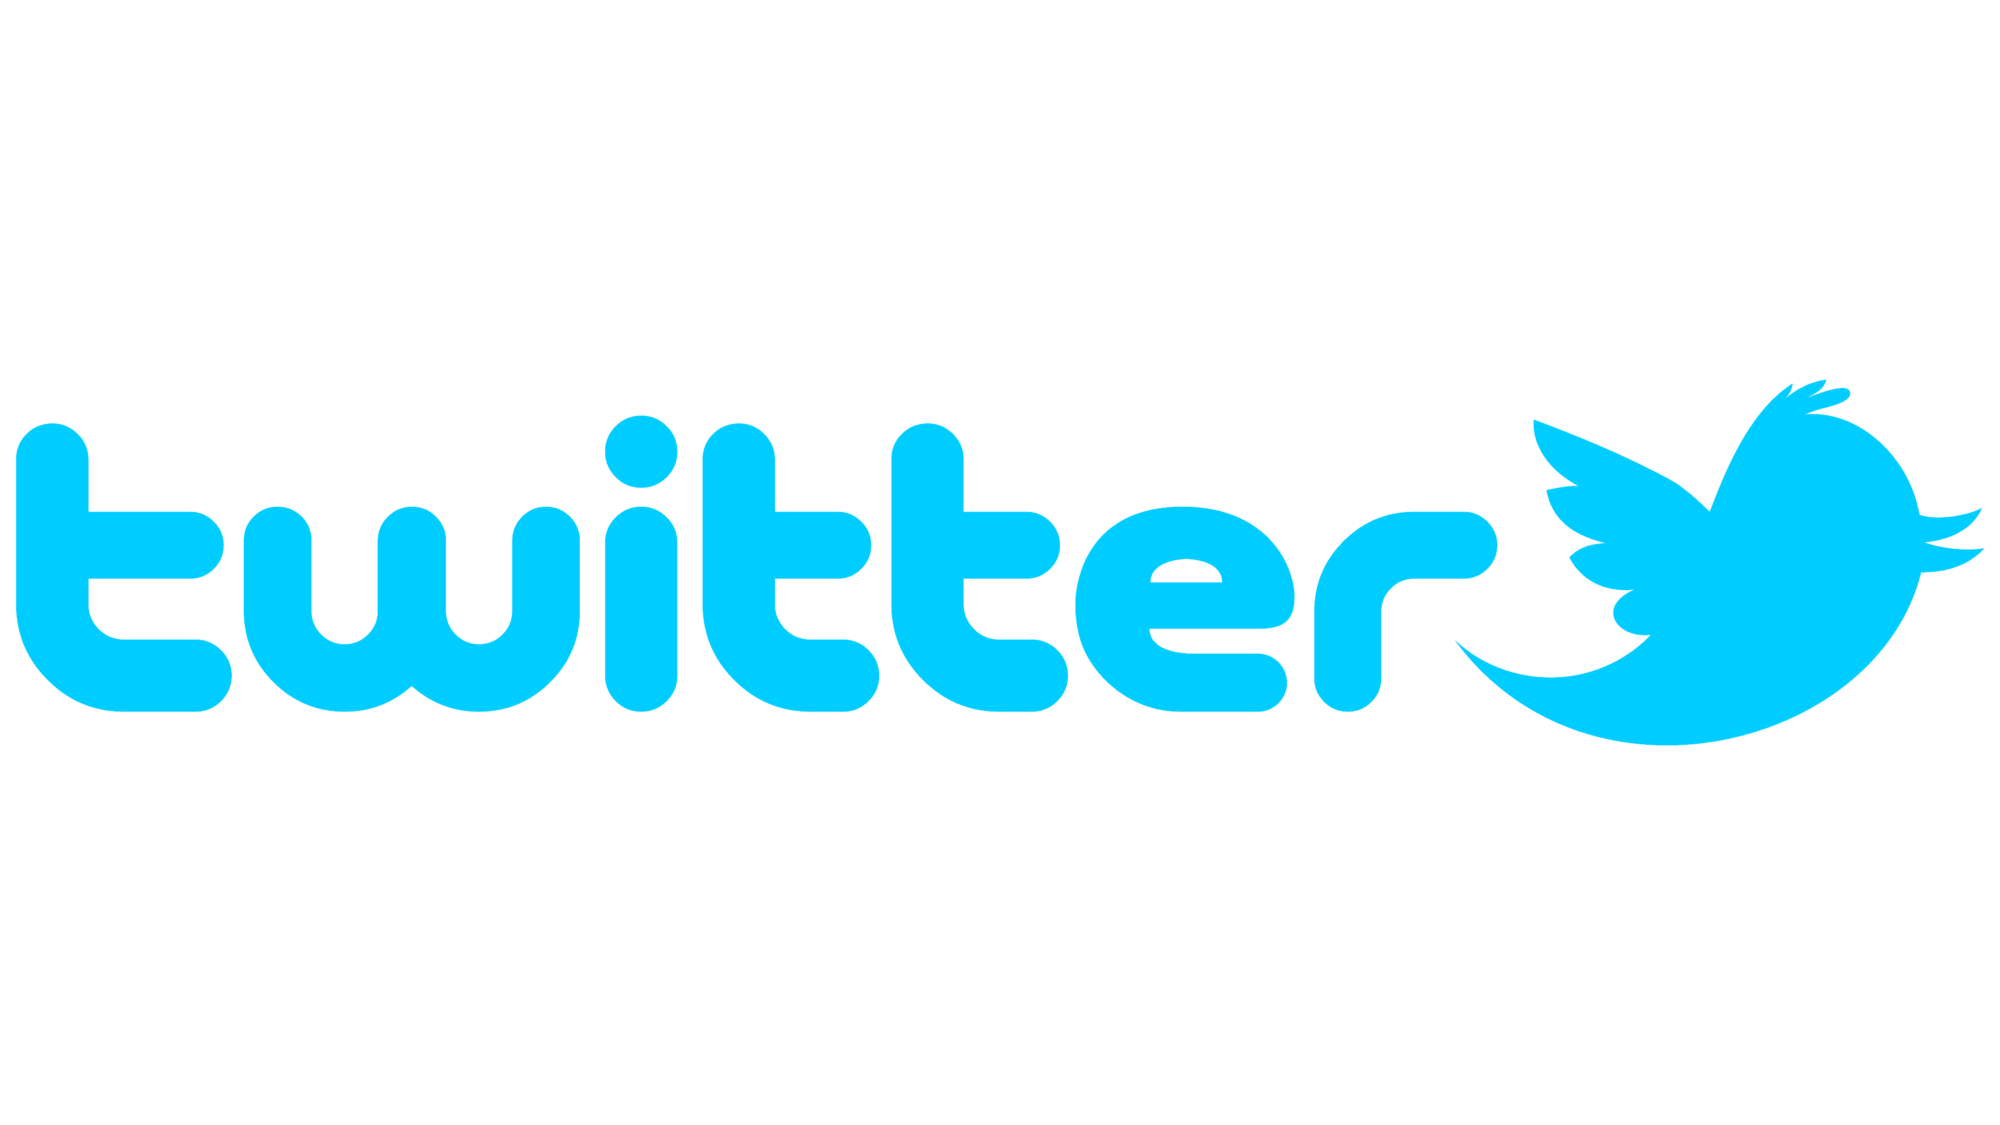 Twitter logo text with bird in blue